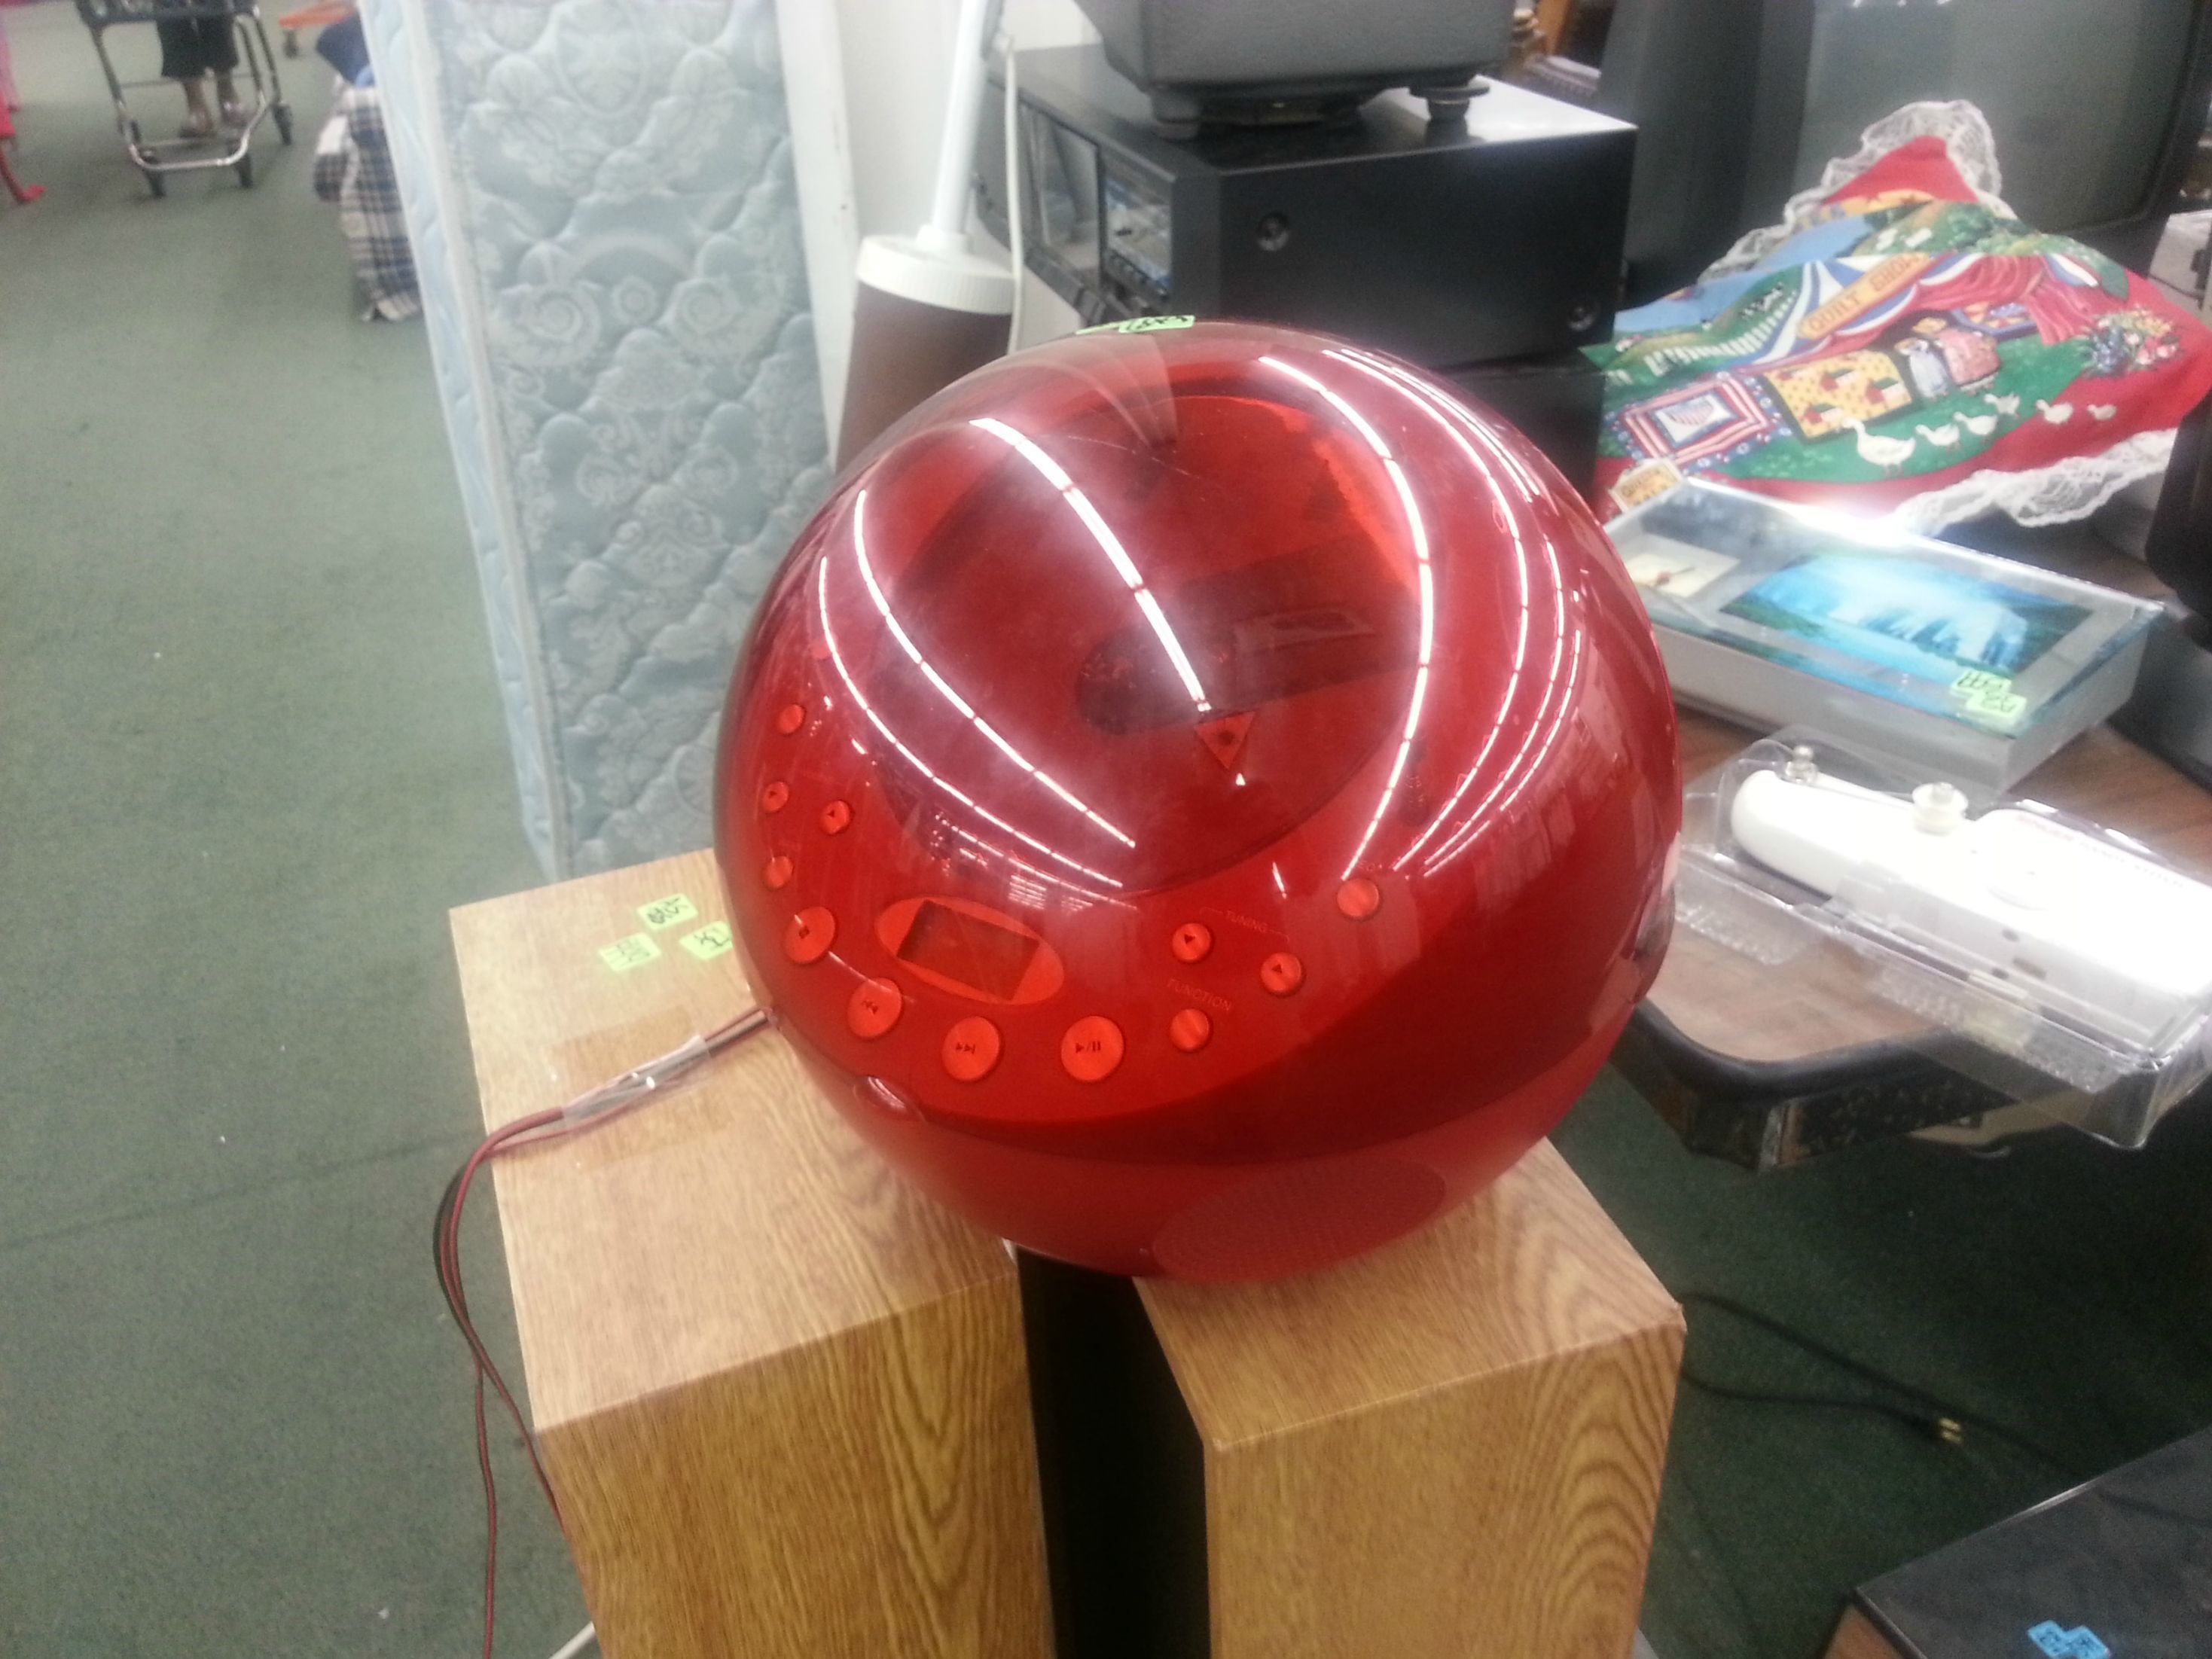 I found the game sphere